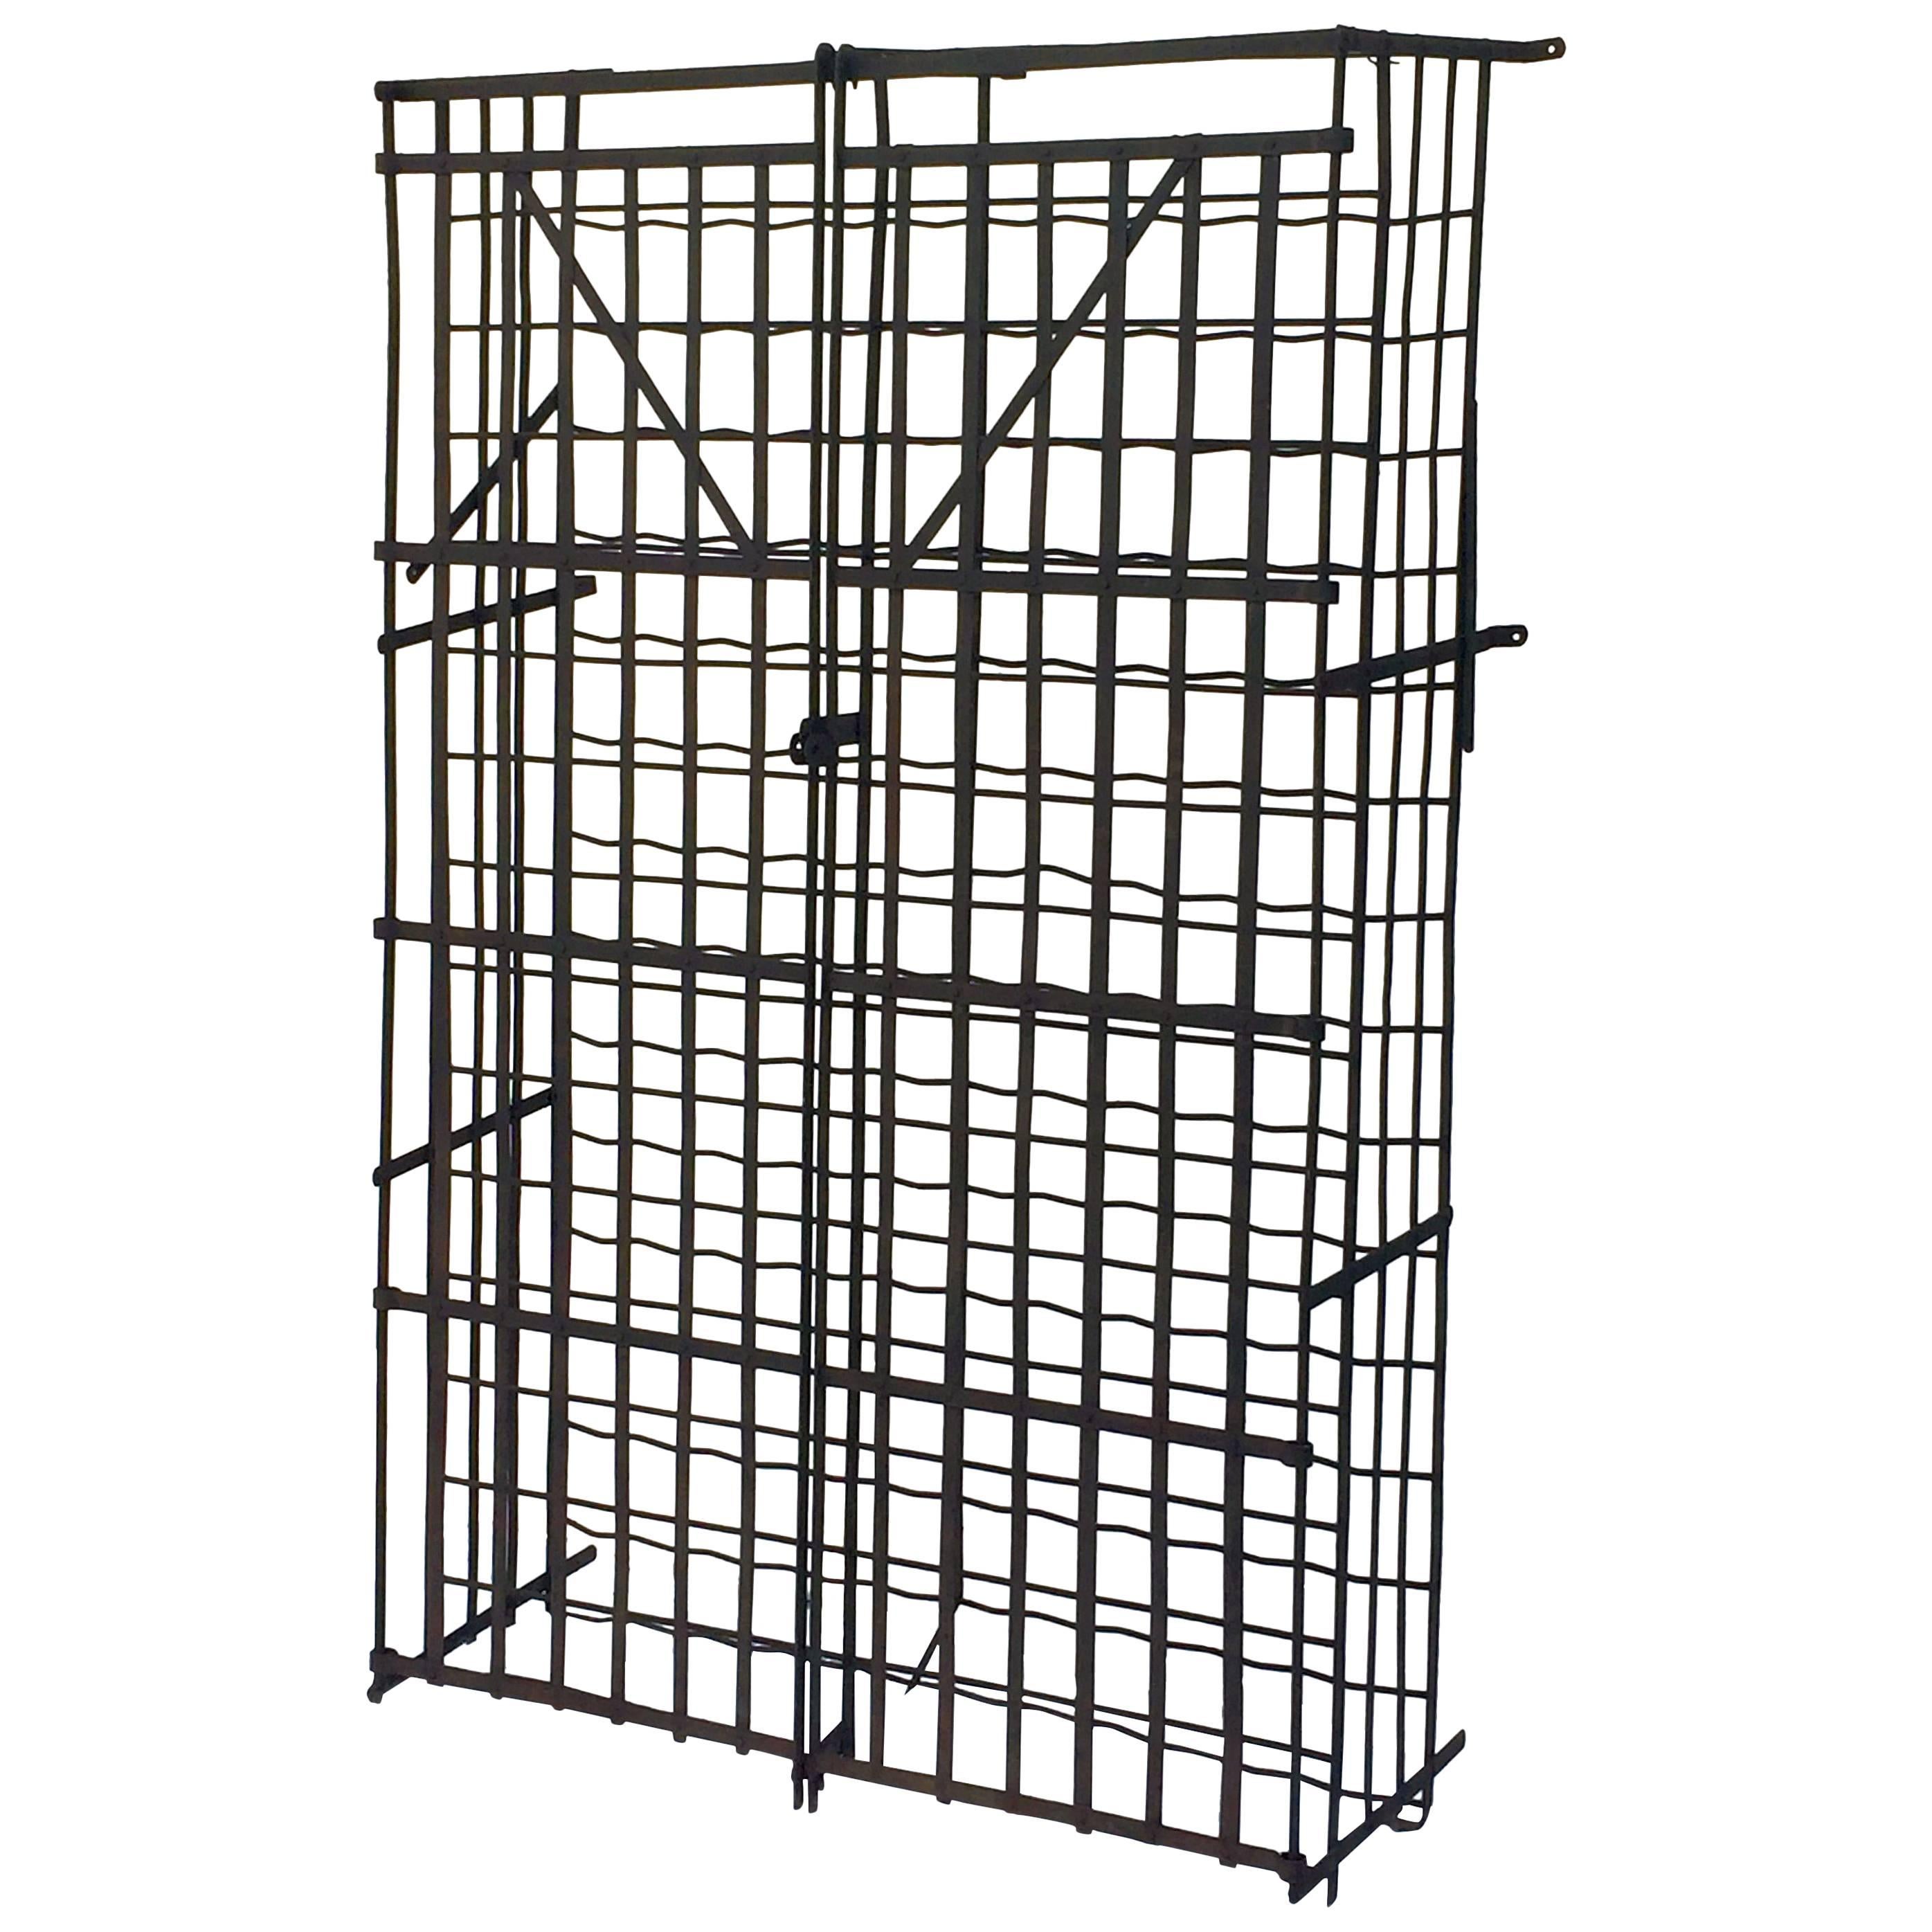 French Steel Wine Crates or Lockers